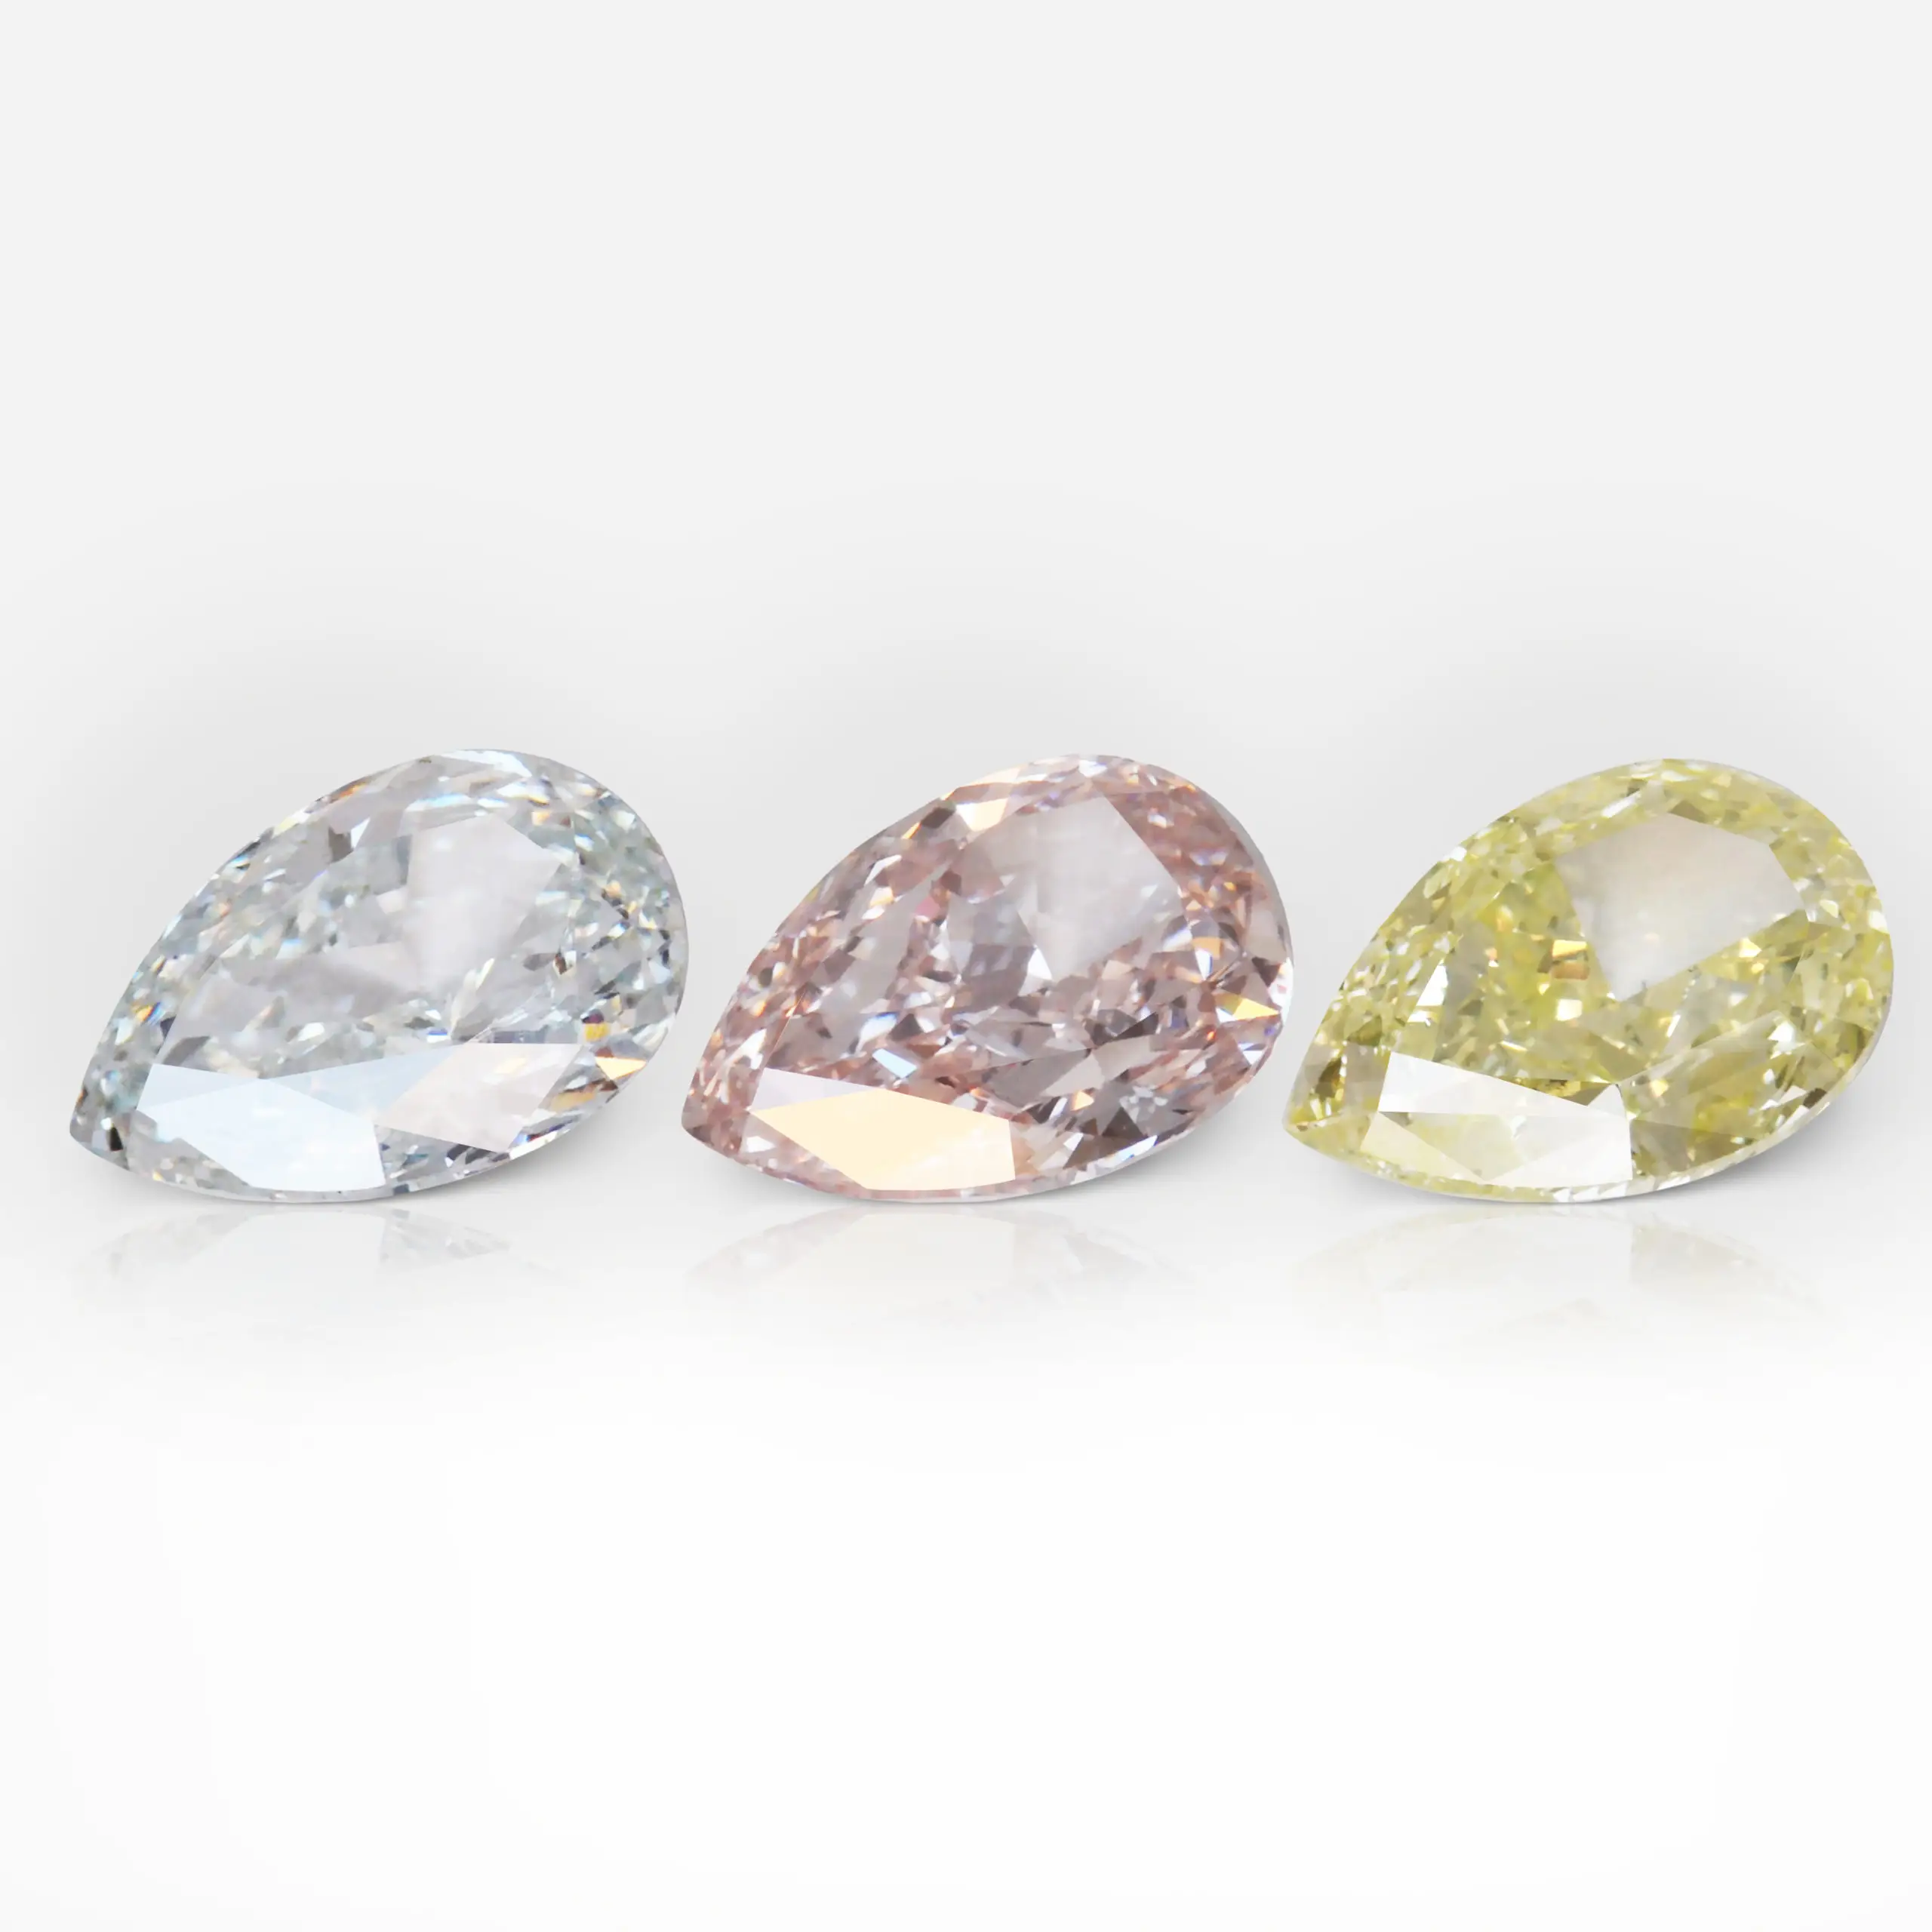 1.04, 0.90 and 1.01 carat Triple Set of Fancy Light Green, Fancy Orangy Pink and Fancy Intense Green-Yellow Pear Shape Diamonds GIA - picture 1